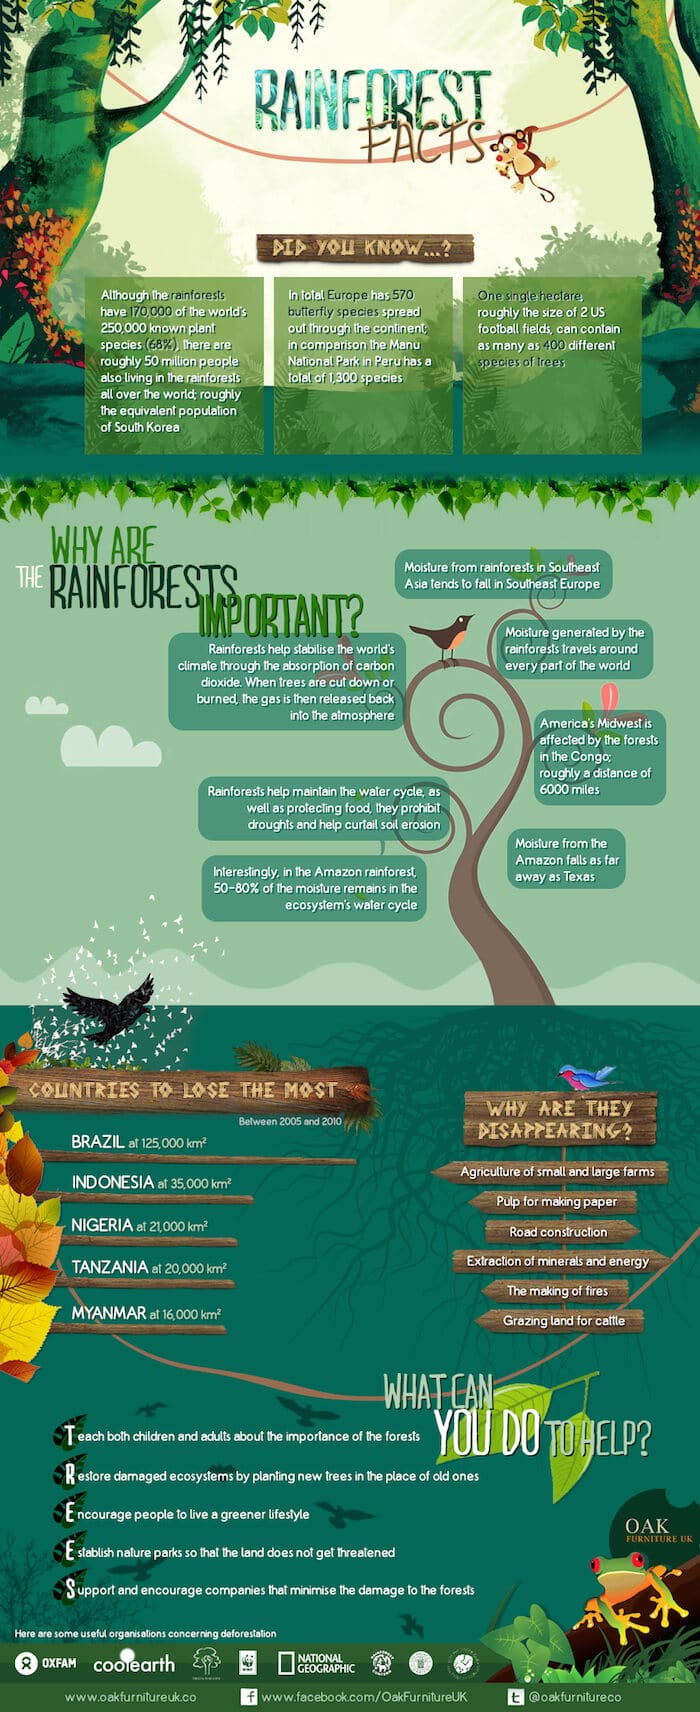 rainforest facts infographic